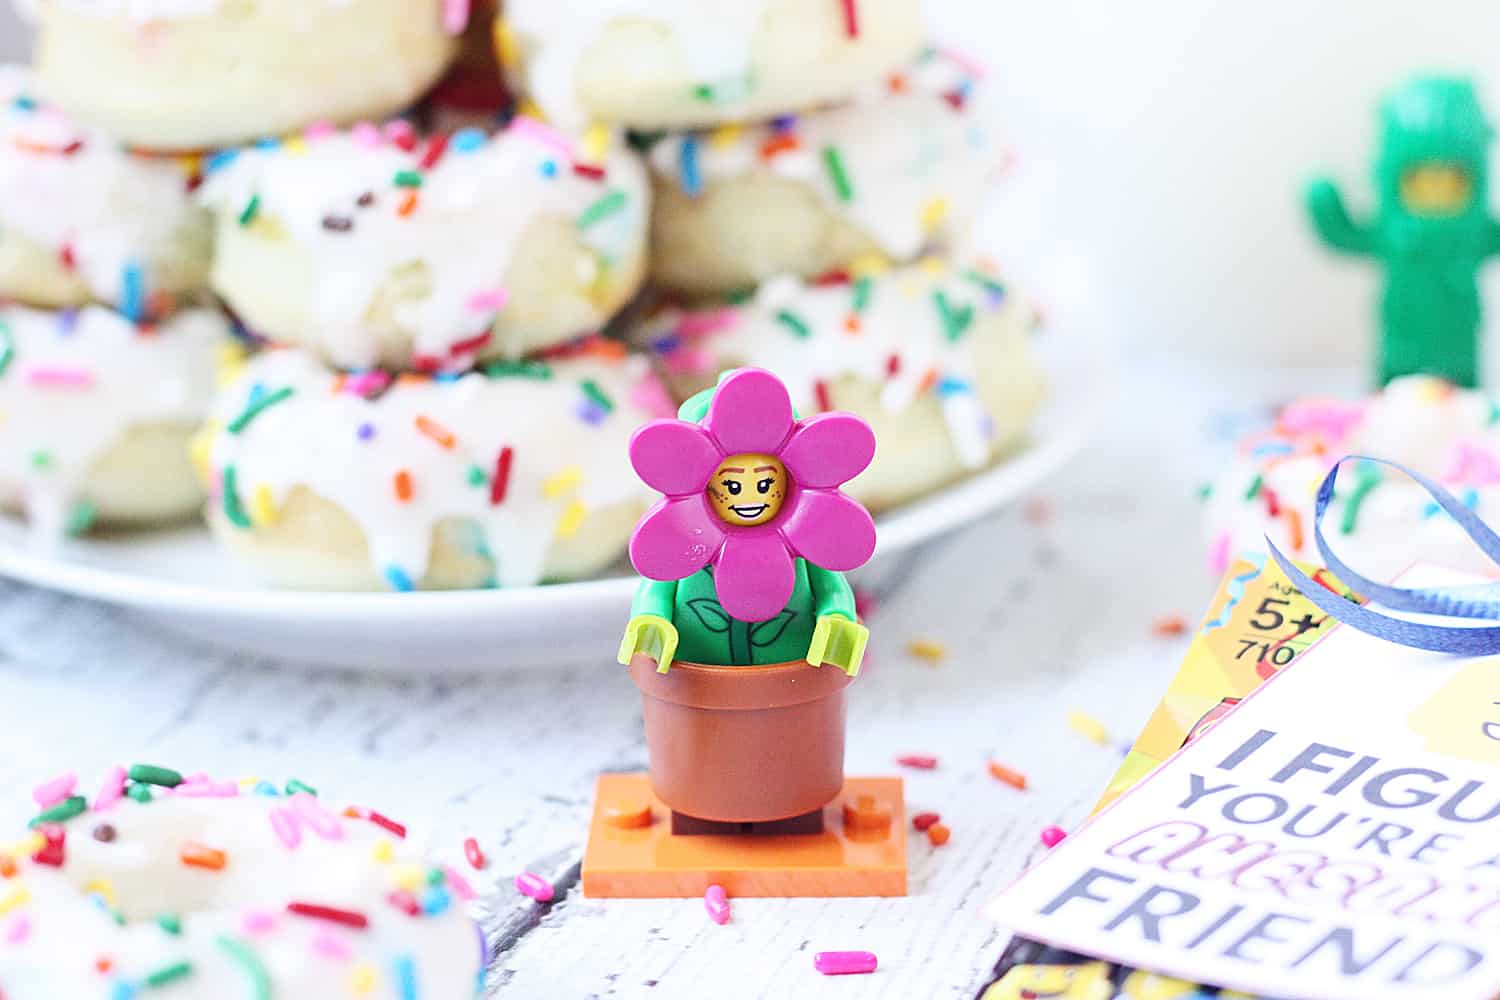 FREE Printable LEGO Gift Tag -- Having a LEGO party? Attach this free printable LEGO gift tag to one of the new collectible LEGO minifigures or any LEGO minifig for the perfect party guest thank-you! #lego #minifig #minifigure #legoparty #birthday #gifttag #giftidea #printable #freeprintable #legoprintable #legobirthday